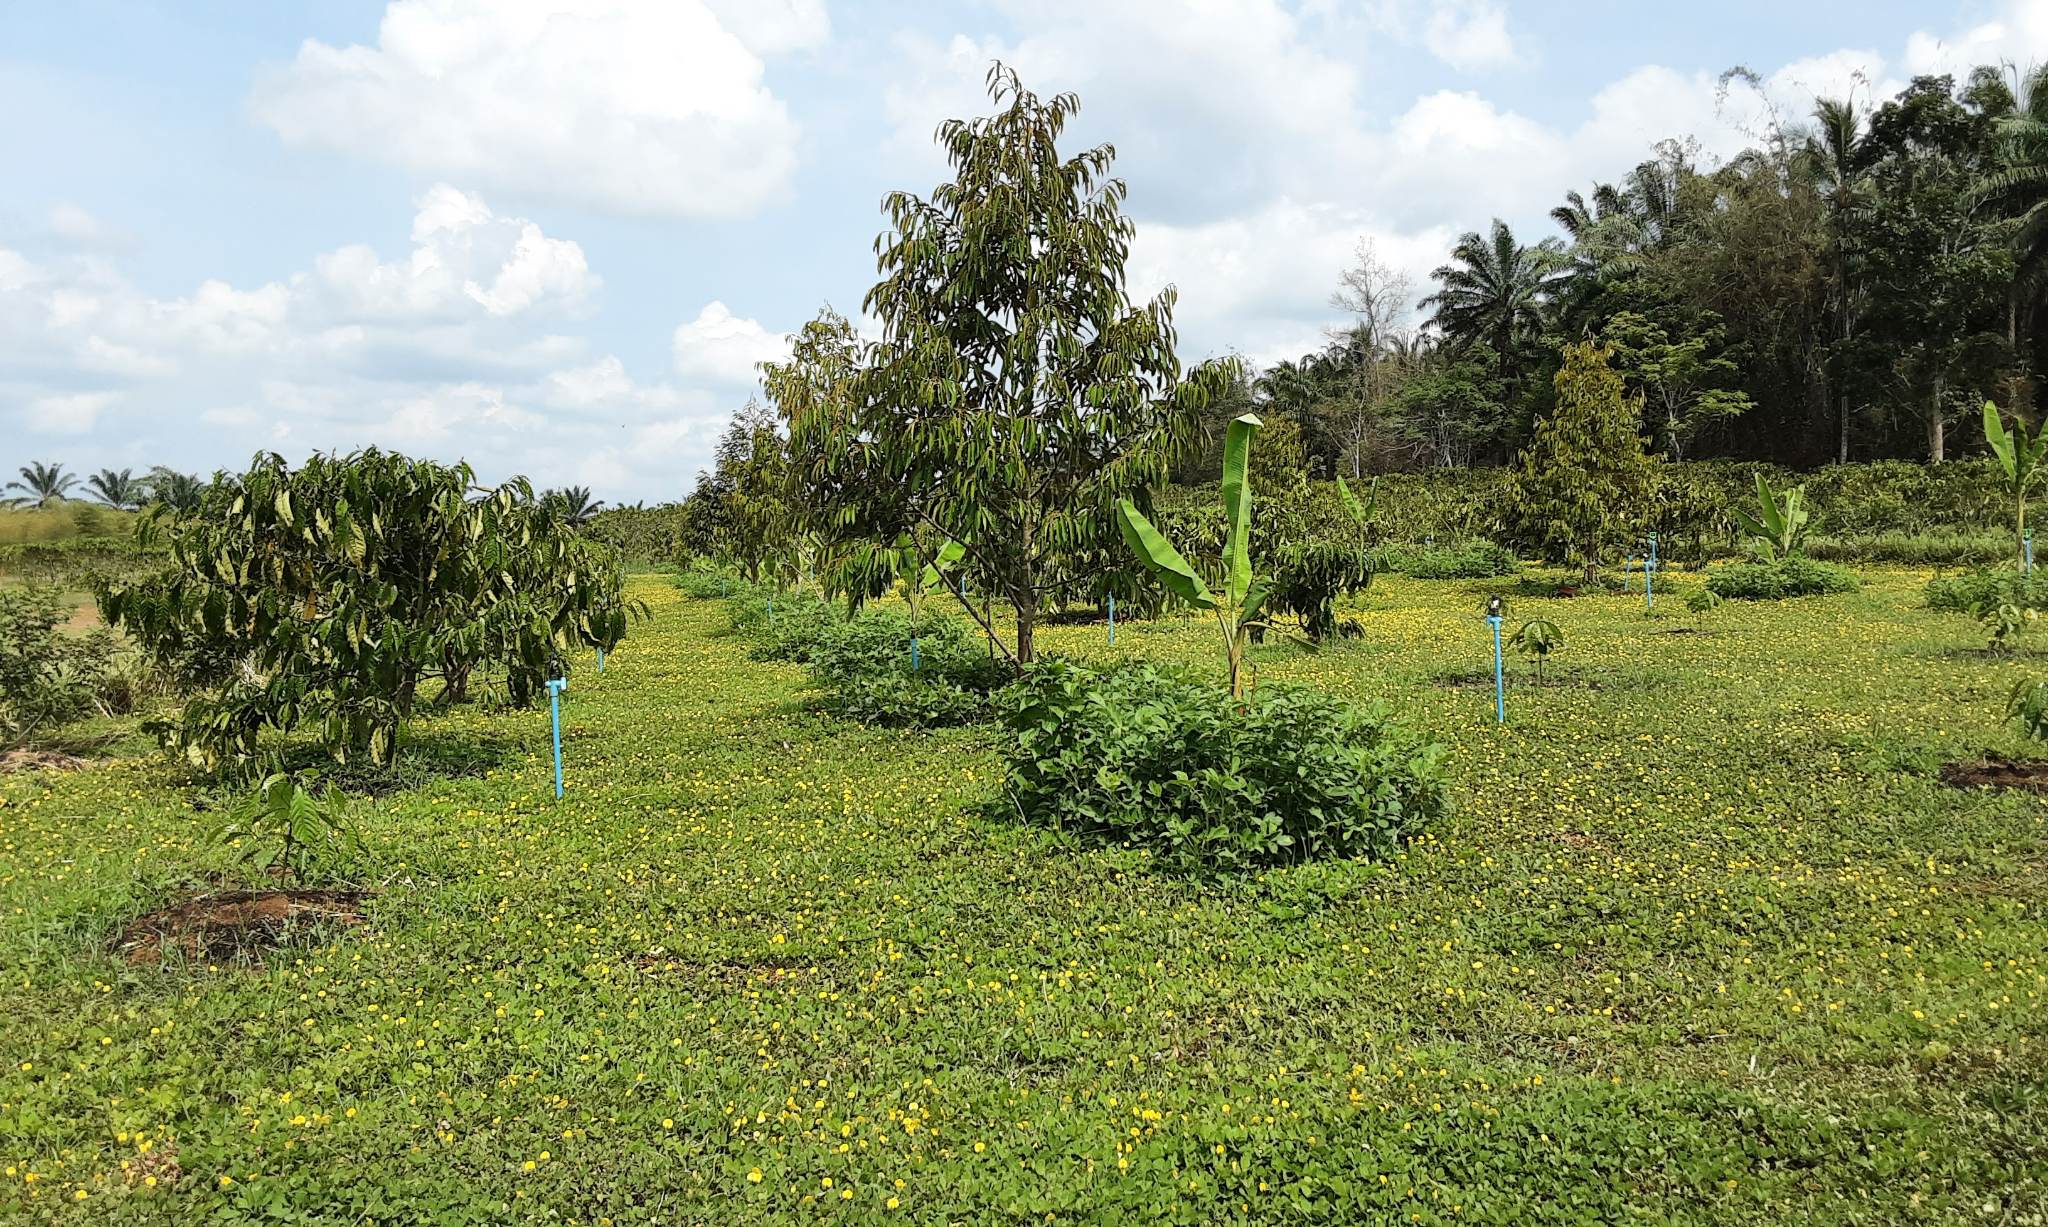 Intercropping model: planting coffee with banana, durian and cover crops such as peanut and arachis pintoi